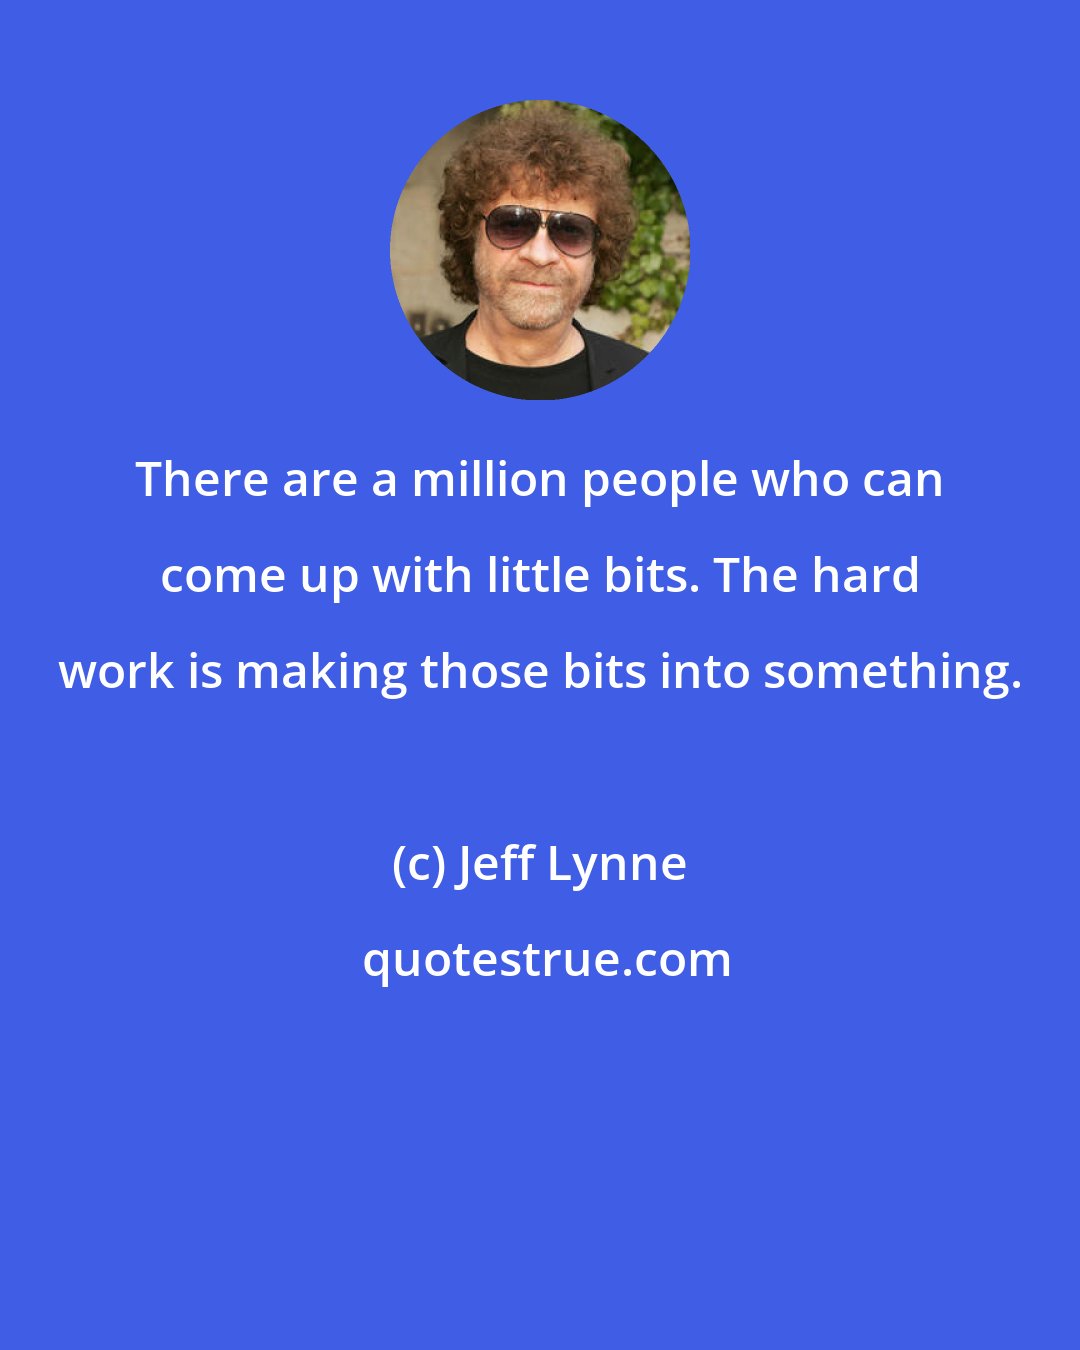 Jeff Lynne: There are a million people who can come up with little bits. The hard work is making those bits into something.